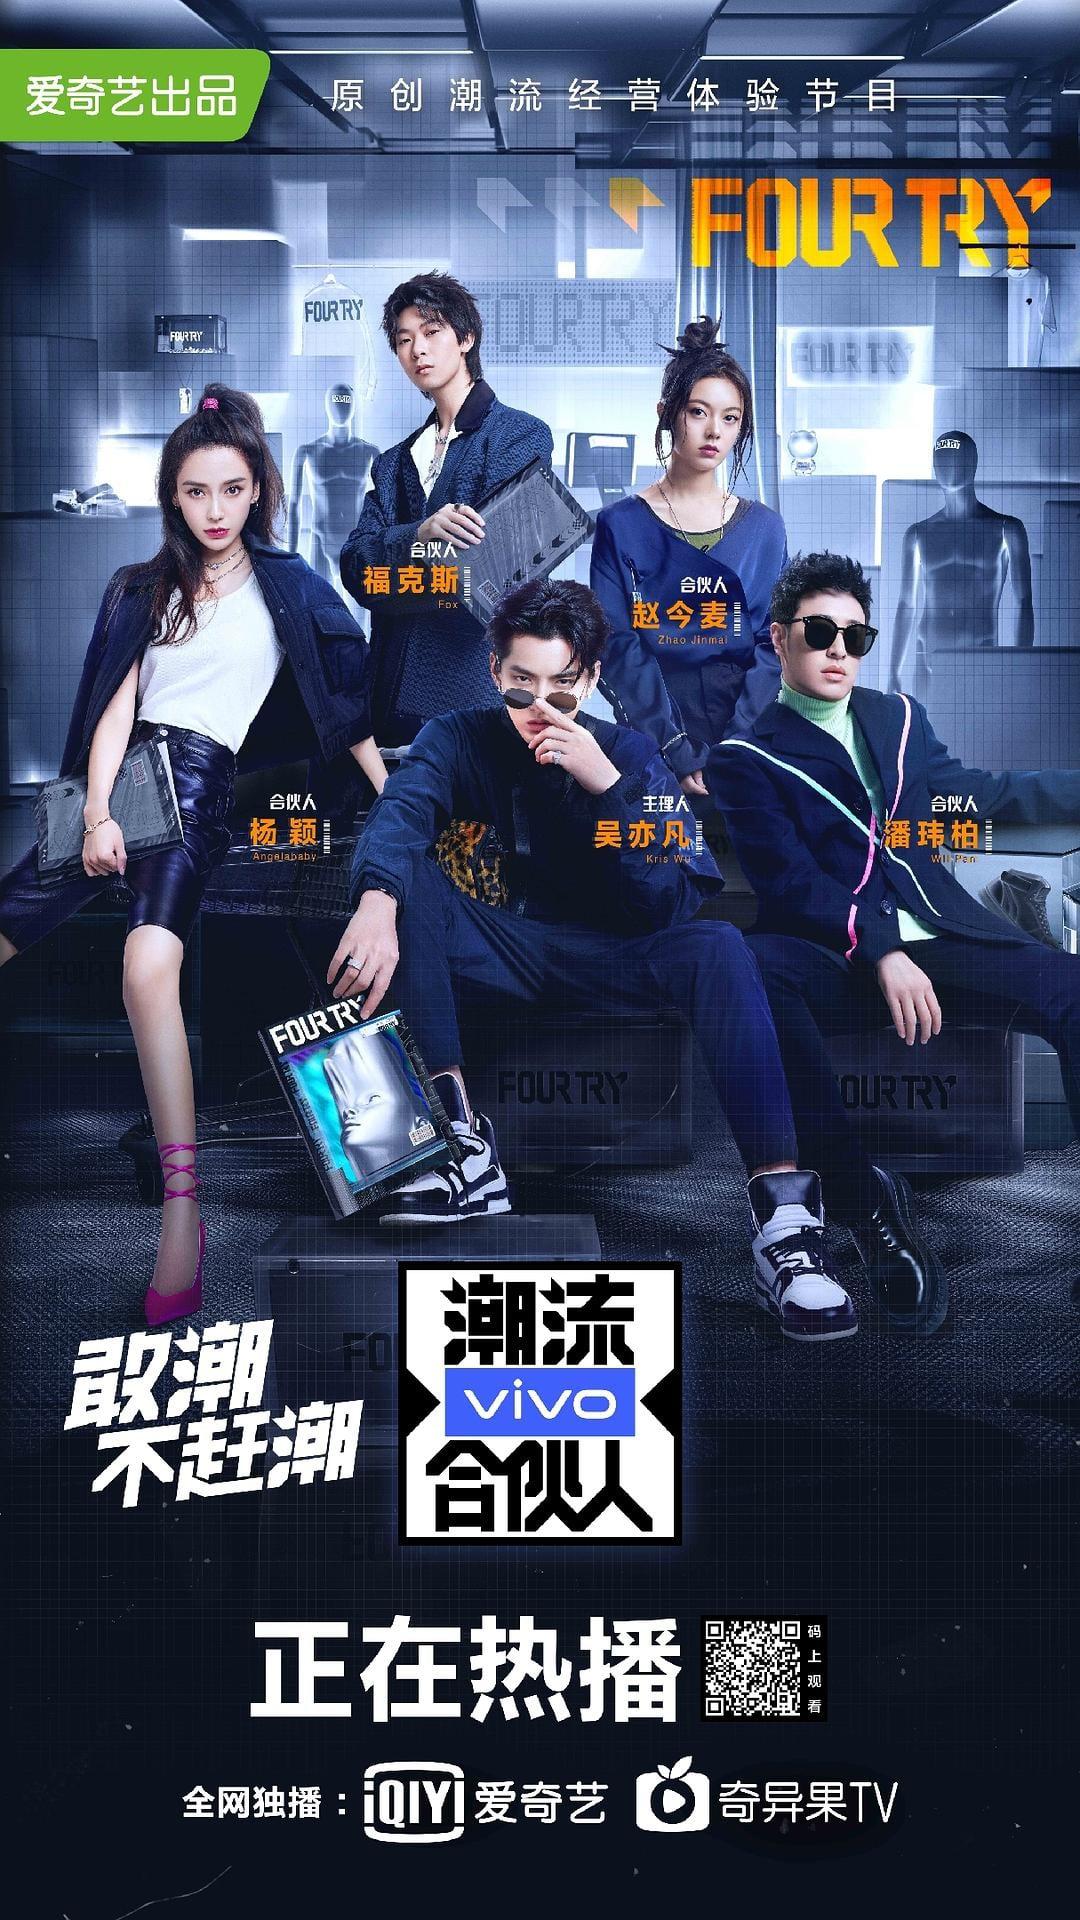 TV ratings for Four Try(潮流合伙人) in the United Kingdom. iqiyi TV series